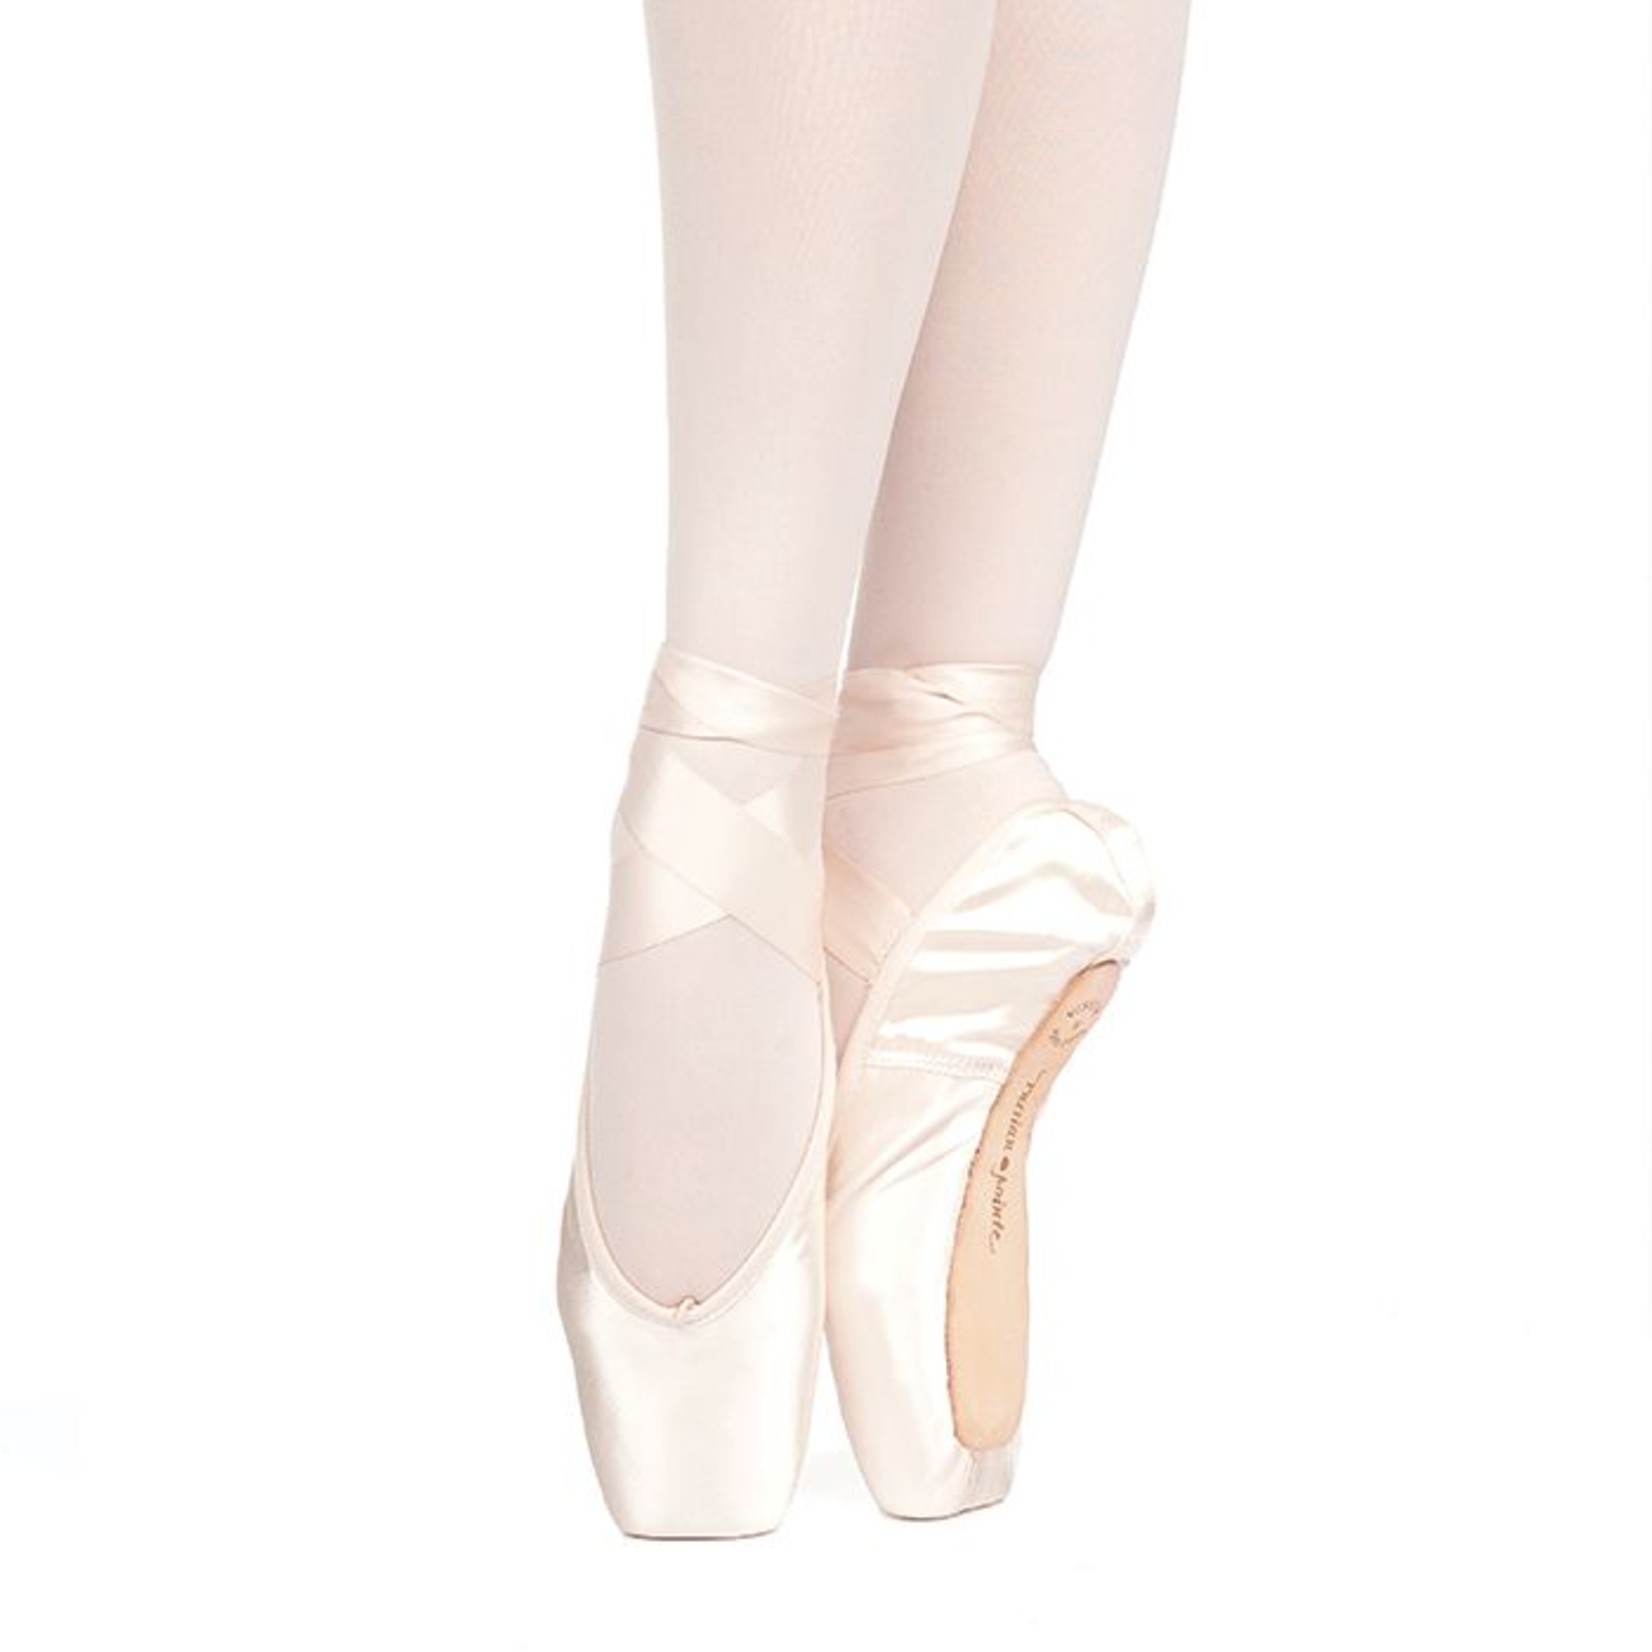 Russian Pointe Size 39: Muse U-Cut Pointe Shoes with Drawstring